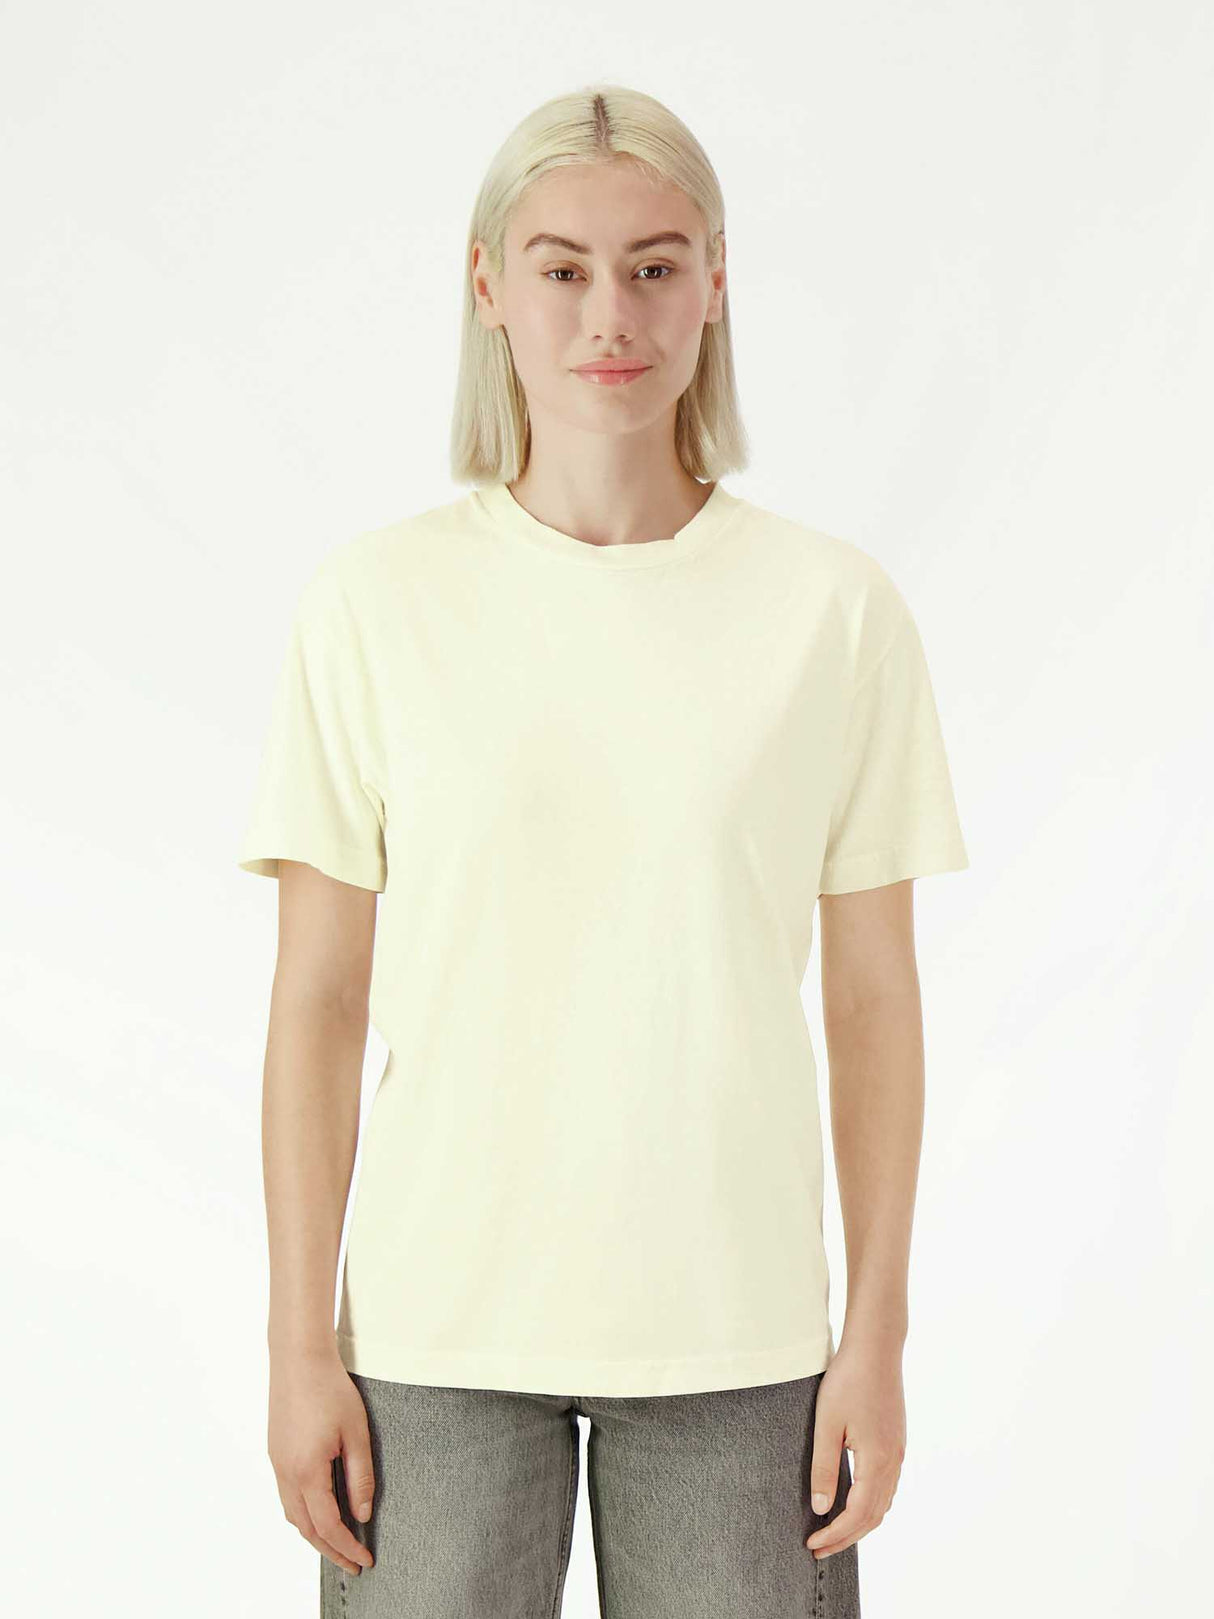 Adult Heavy Weight Garment Dyed T-Shirt